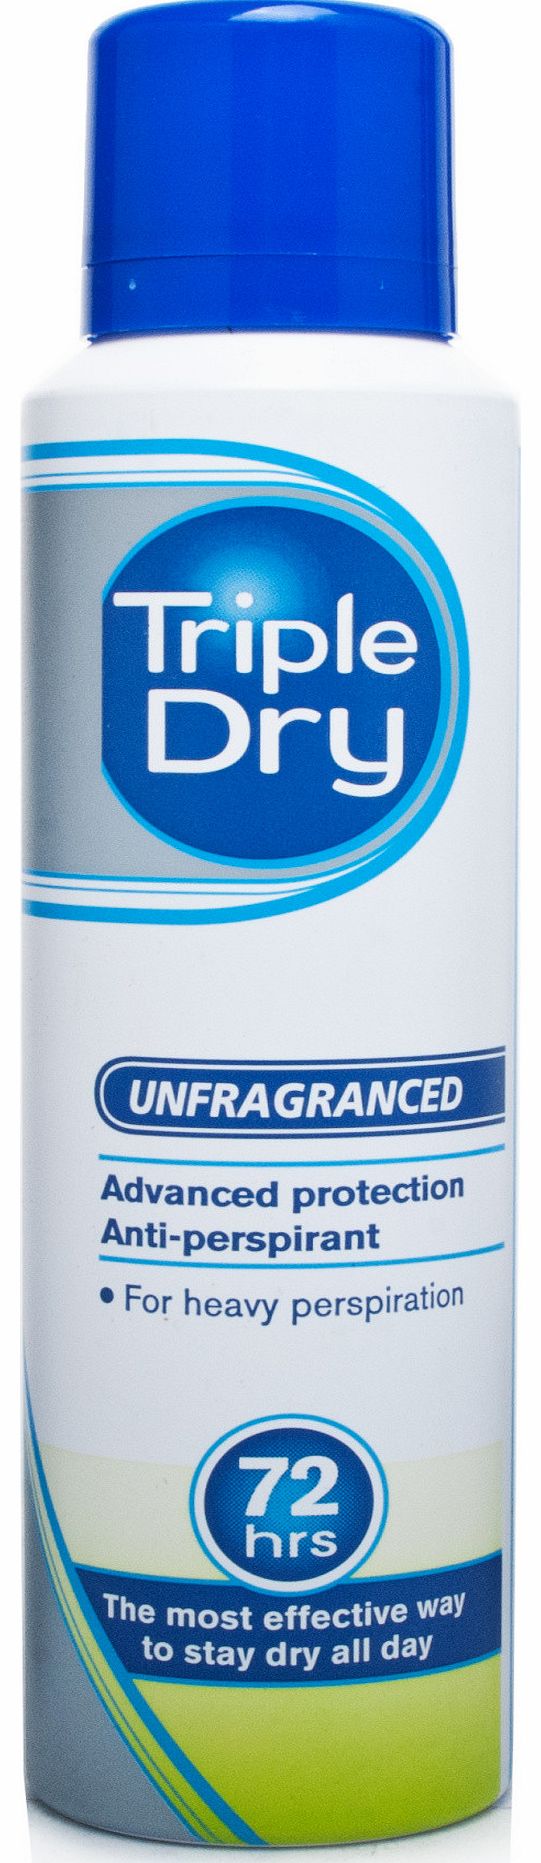 Triple Dry Advanced Protection Anti-Perspirant